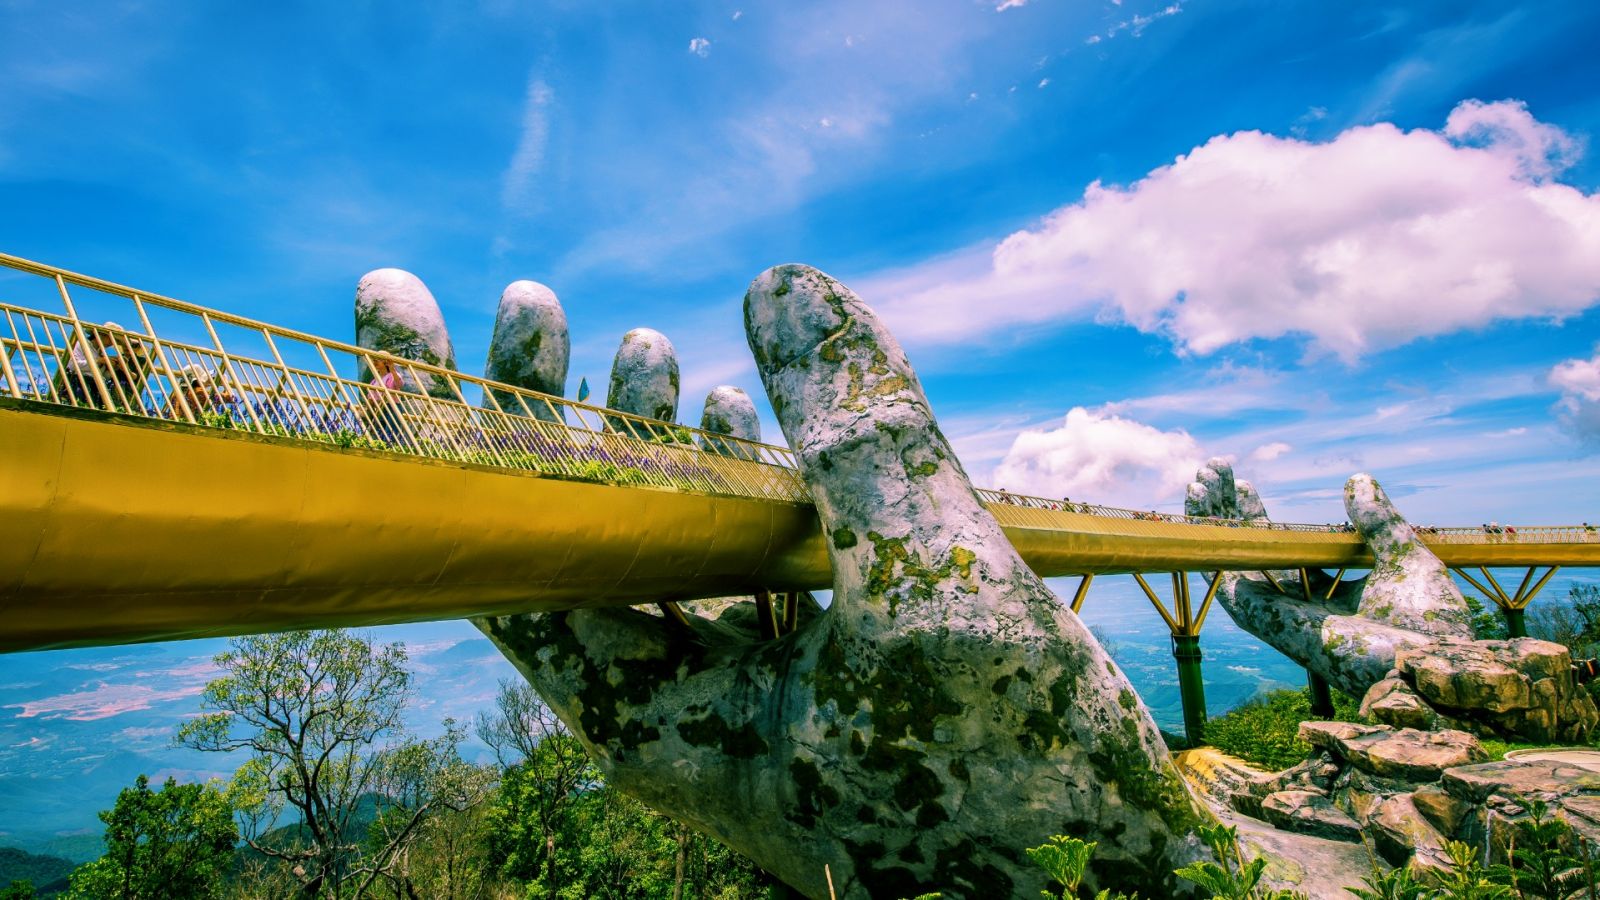 The Golden Bridge in Ba Na Hills has been known worldwide due to its unique design.